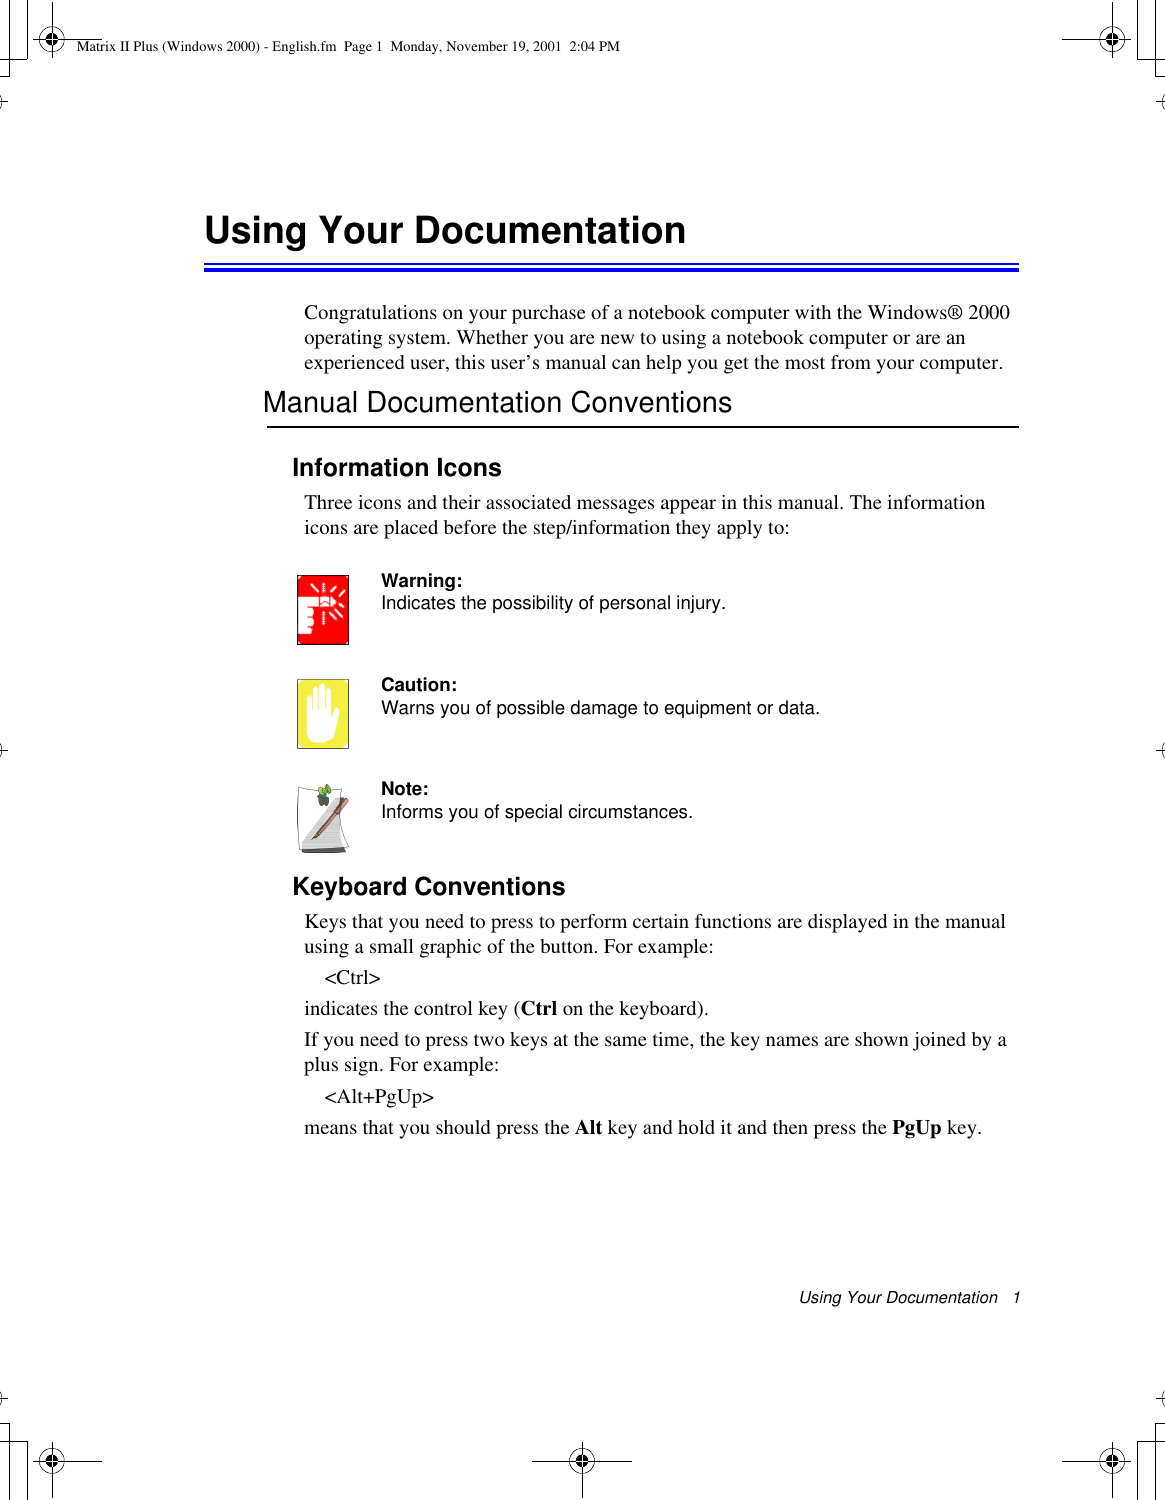 Using Your Documentation   1Using Your DocumentationCongratulations on your purchase of a notebook computer with the Windows® 2000 operating system. Whether you are new to using a notebook computer or are an experienced user, this user’s manual can help you get the most from your computer.Manual Documentation ConventionsInformation IconsThree icons and their associated messages appear in this manual. The information icons are placed before the step/information they apply to:Warning:Indicates the possibility of personal injury.Caution:Warns you of possible damage to equipment or data.Note:Informs you of special circumstances.Keyboard ConventionsKeys that you need to press to perform certain functions are displayed in the manual using a small graphic of the button. For example: &lt;Ctrl&gt;indicates the control key (Ctrl on the keyboard). If you need to press two keys at the same time, the key names are shown joined by a plus sign. For example:&lt;Alt+PgUp&gt;means that you should press the Alt key and hold it and then press the PgUp key.Matrix II Plus (Windows 2000) - English.fm  Page 1  Monday, November 19, 2001  2:04 PM